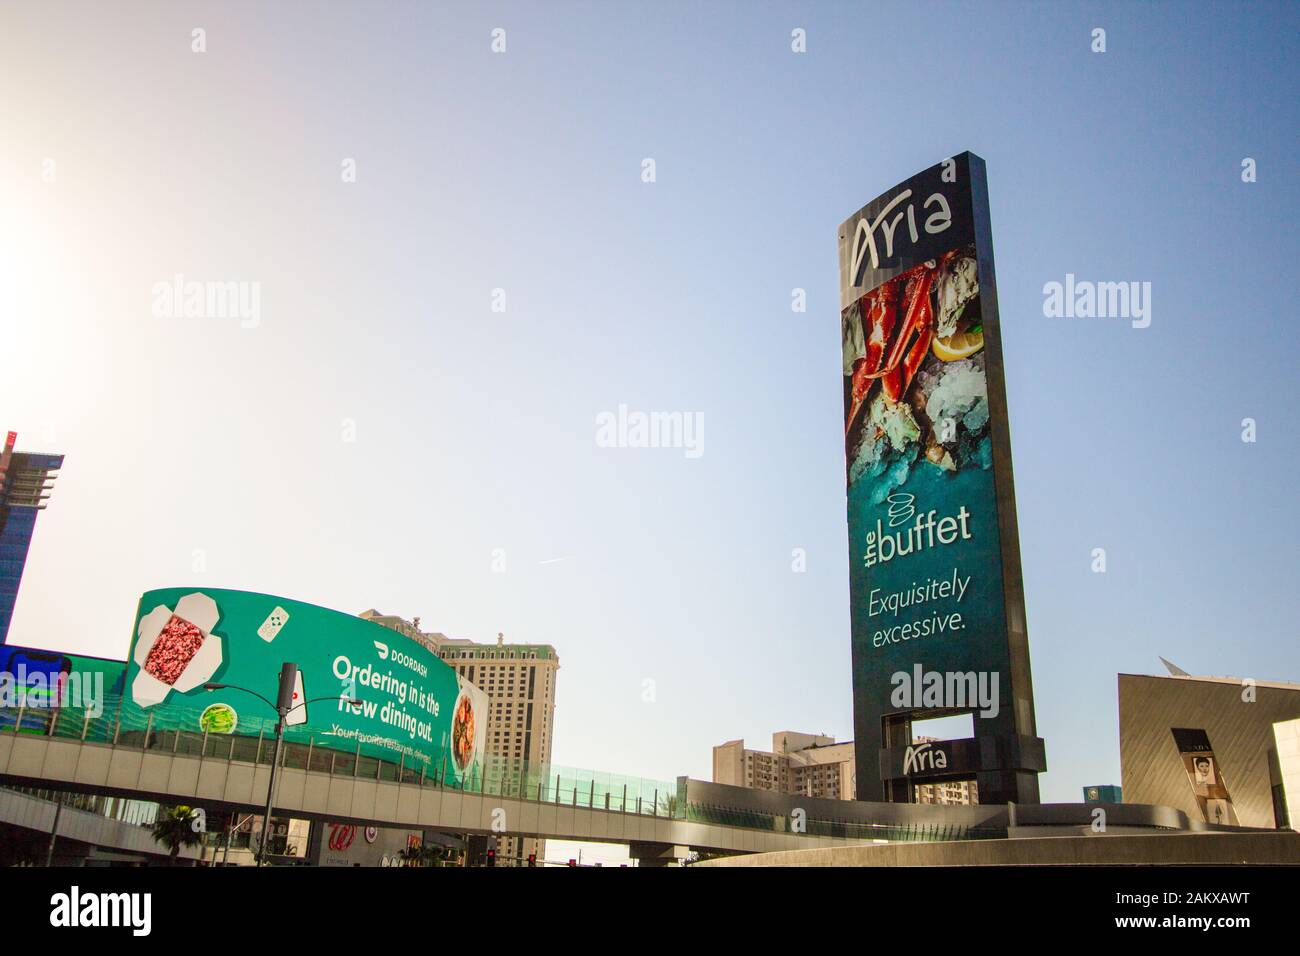 Las Vegas, Nevada, USA -  Exterior sign for the Aria Casino and Resort on the Las Vegas Strip. Aria opened in 2009 and is located on the center strip. Stock Photo